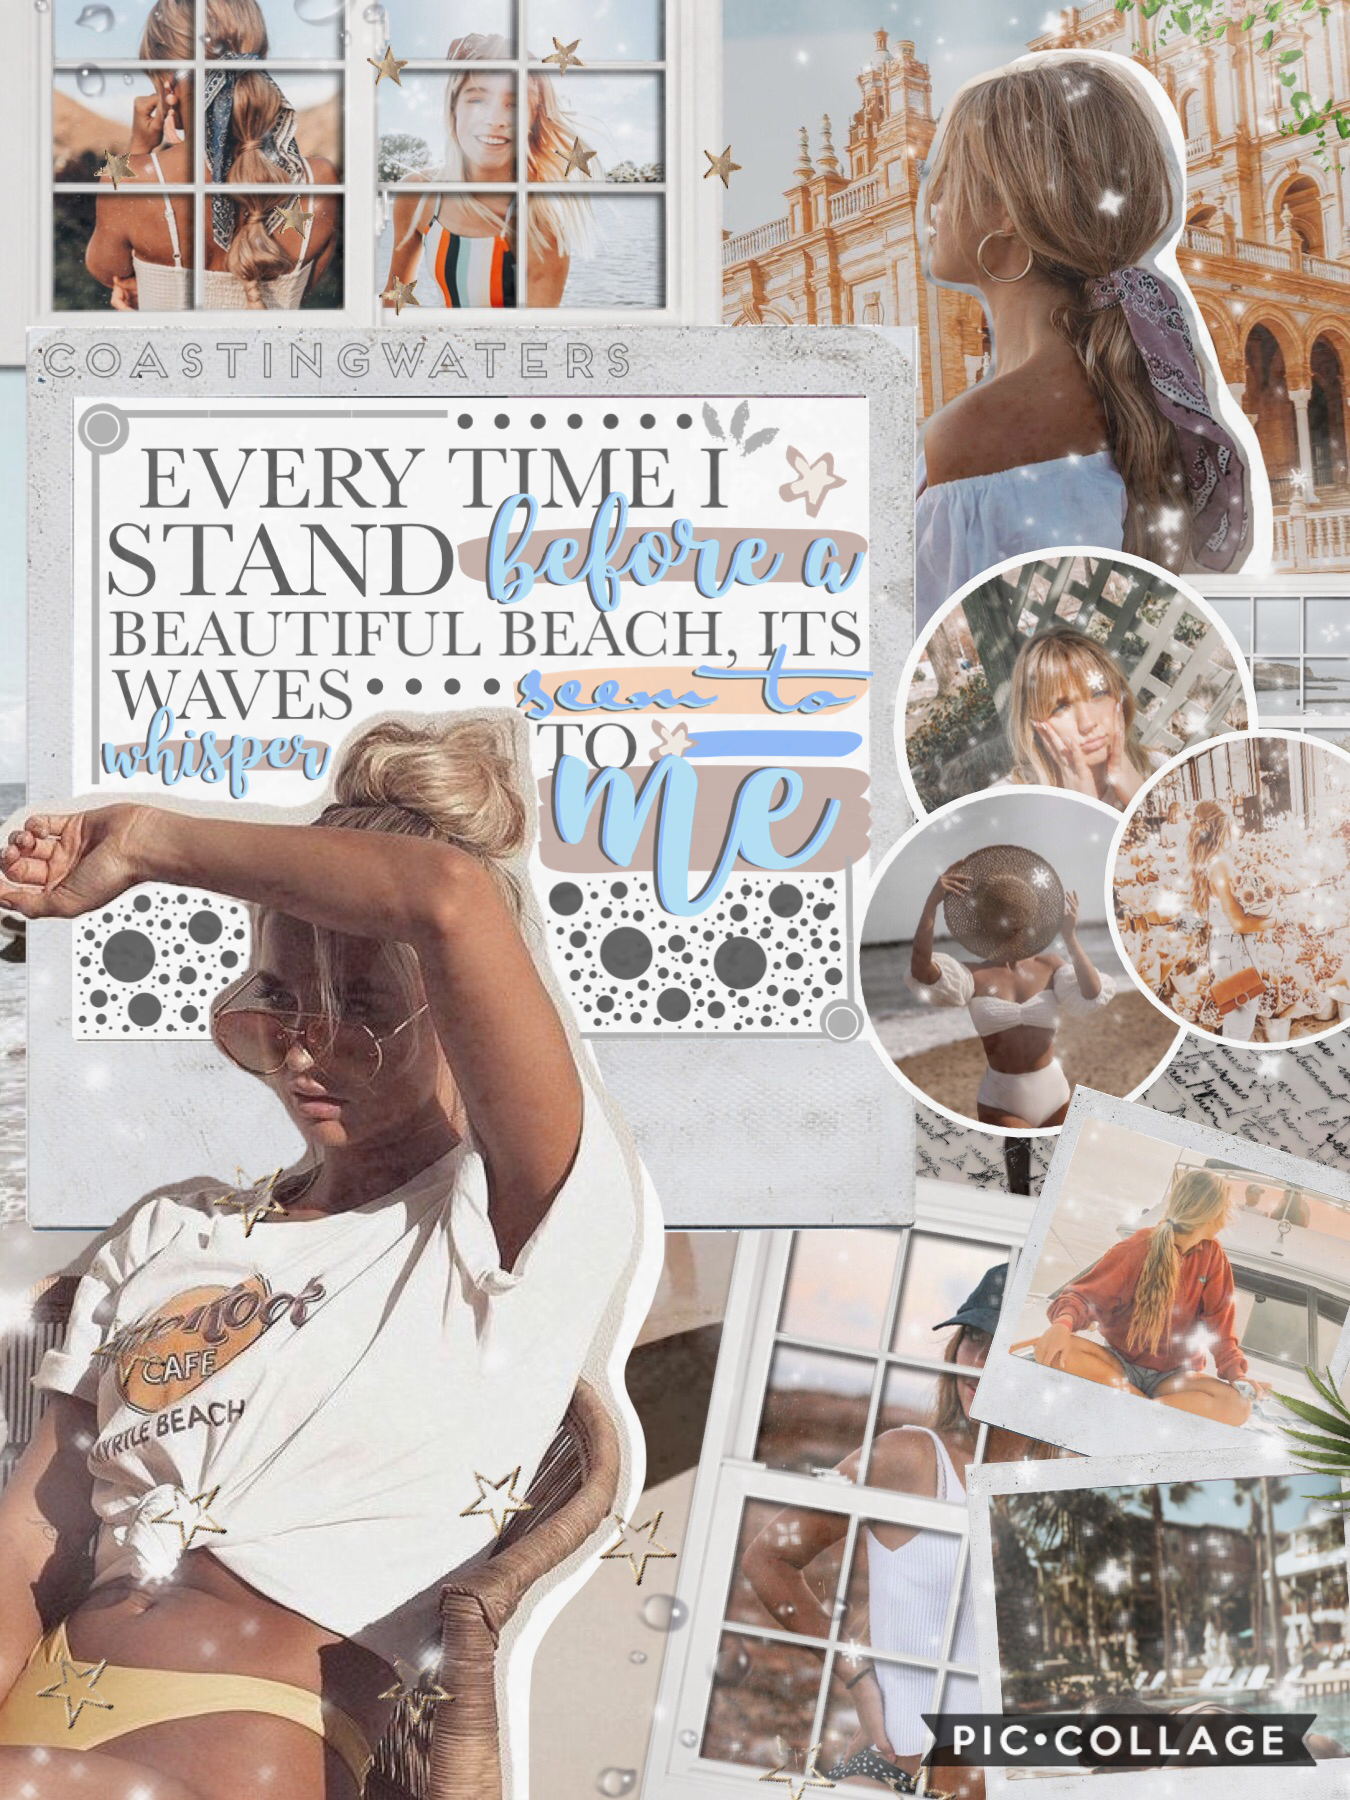 🦃26/11/20🦃
Happy Thanksgiving! It’s the day to give thanks to all the people and things we’re grateful for! I made this beach collage, inspired by meandmeonly and blossomed-! QOTD: What are you thankful for? AOTD: My 4.6k followers! I love you all so much